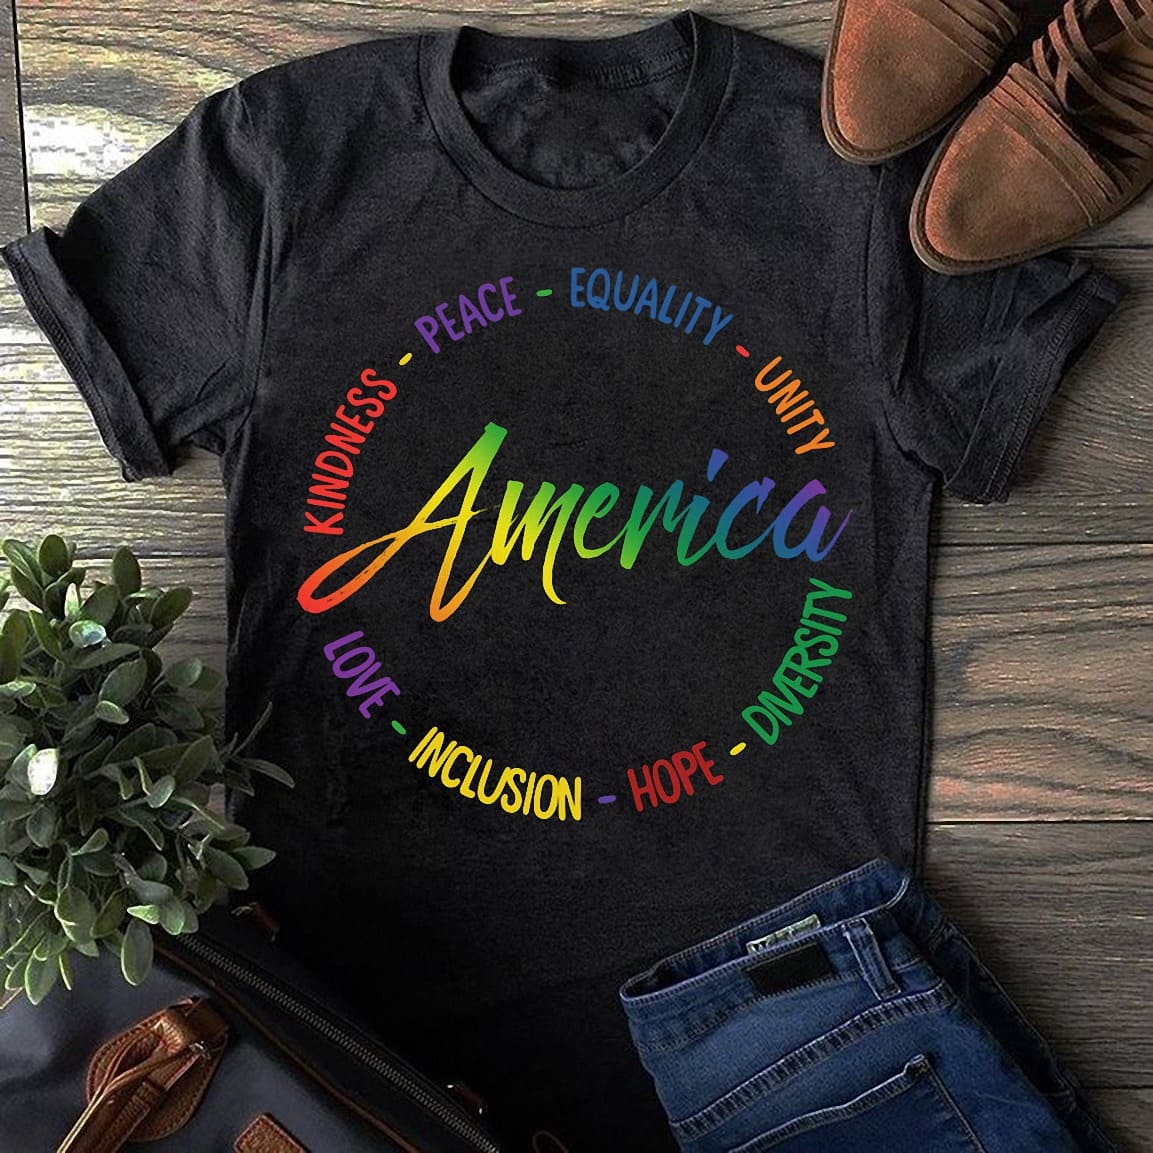 Kindness peace equality - Proud to be American, love inclusion hope diversity